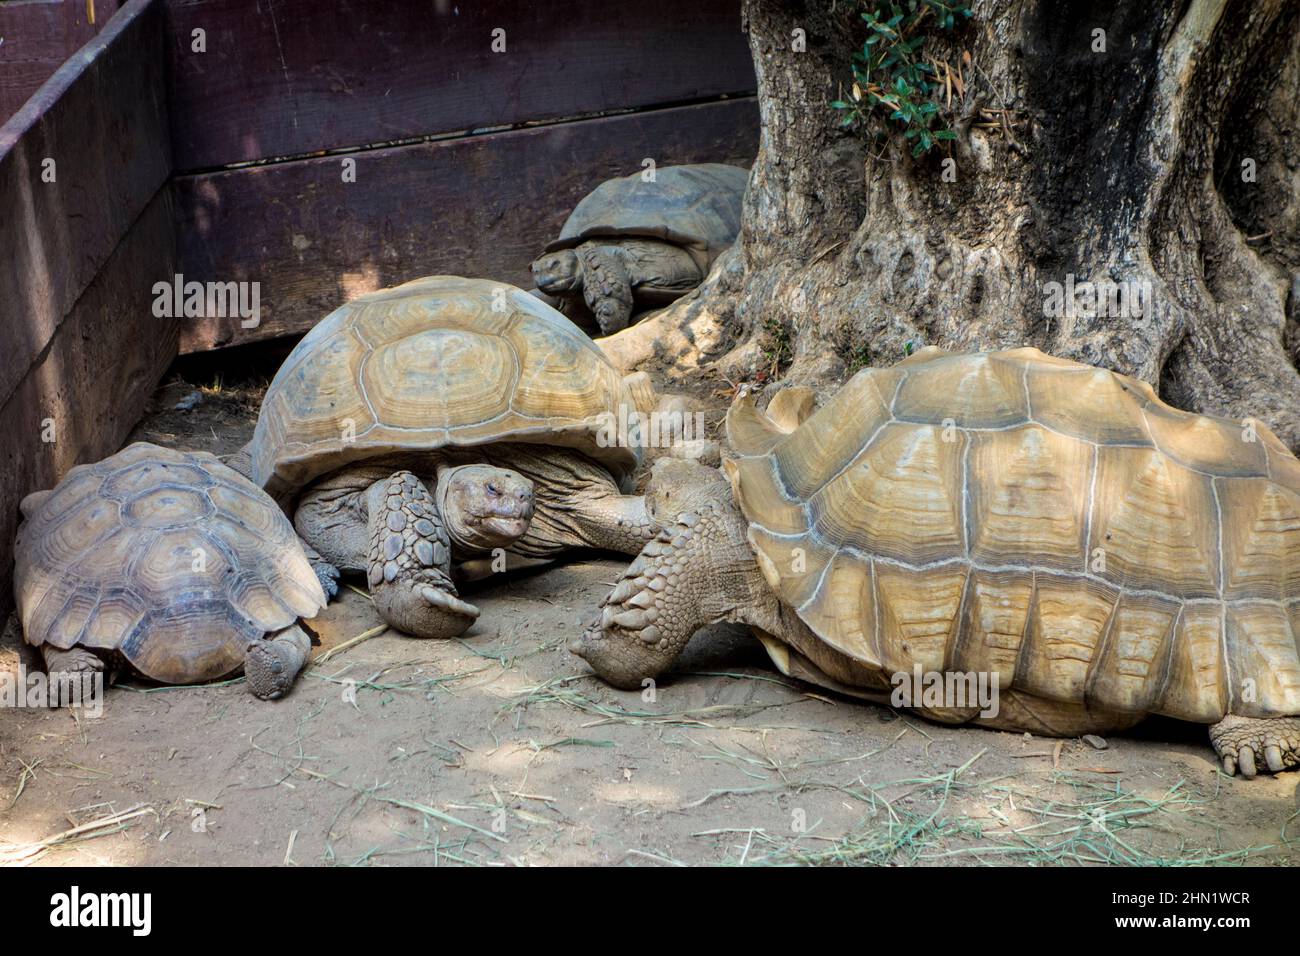 Sulcata Tortoises or African spurred tortoises, Geochelone sulfate, at the Wildlife Learning Center, Sylmar, California, United States Stock Photo